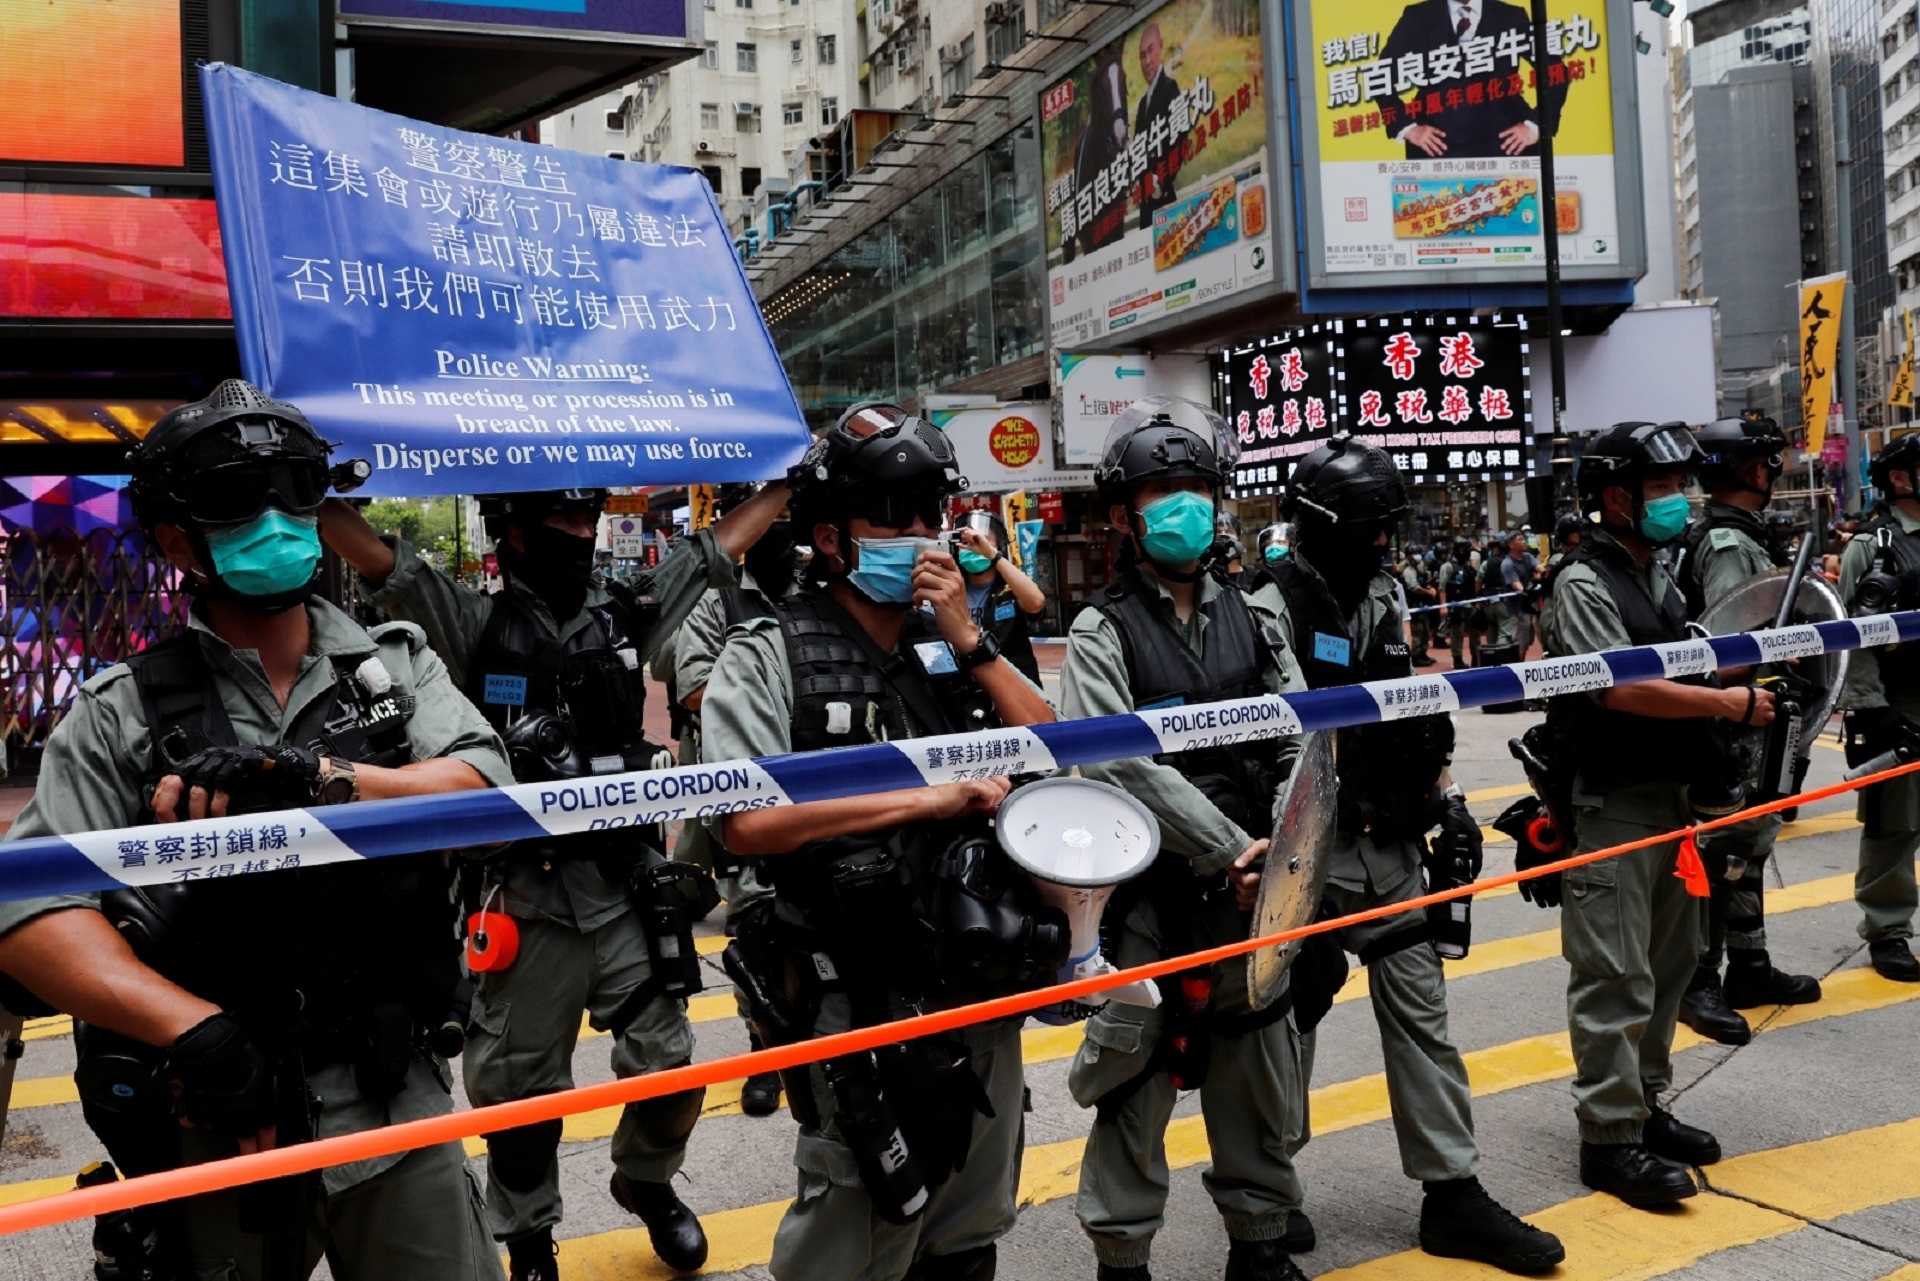 Riot police stand in line as anti-national security law protesters march at the anniversary of Hong Kong's handover to China from Britain in Hong Kong Riot police stand in line as anti-national security law protesters march at the anniversary of Hong Kong's handover to China from Britain in Hong Kong, China July 1, 2020. REUTERS/Tyrone Siu TYRONE SIU